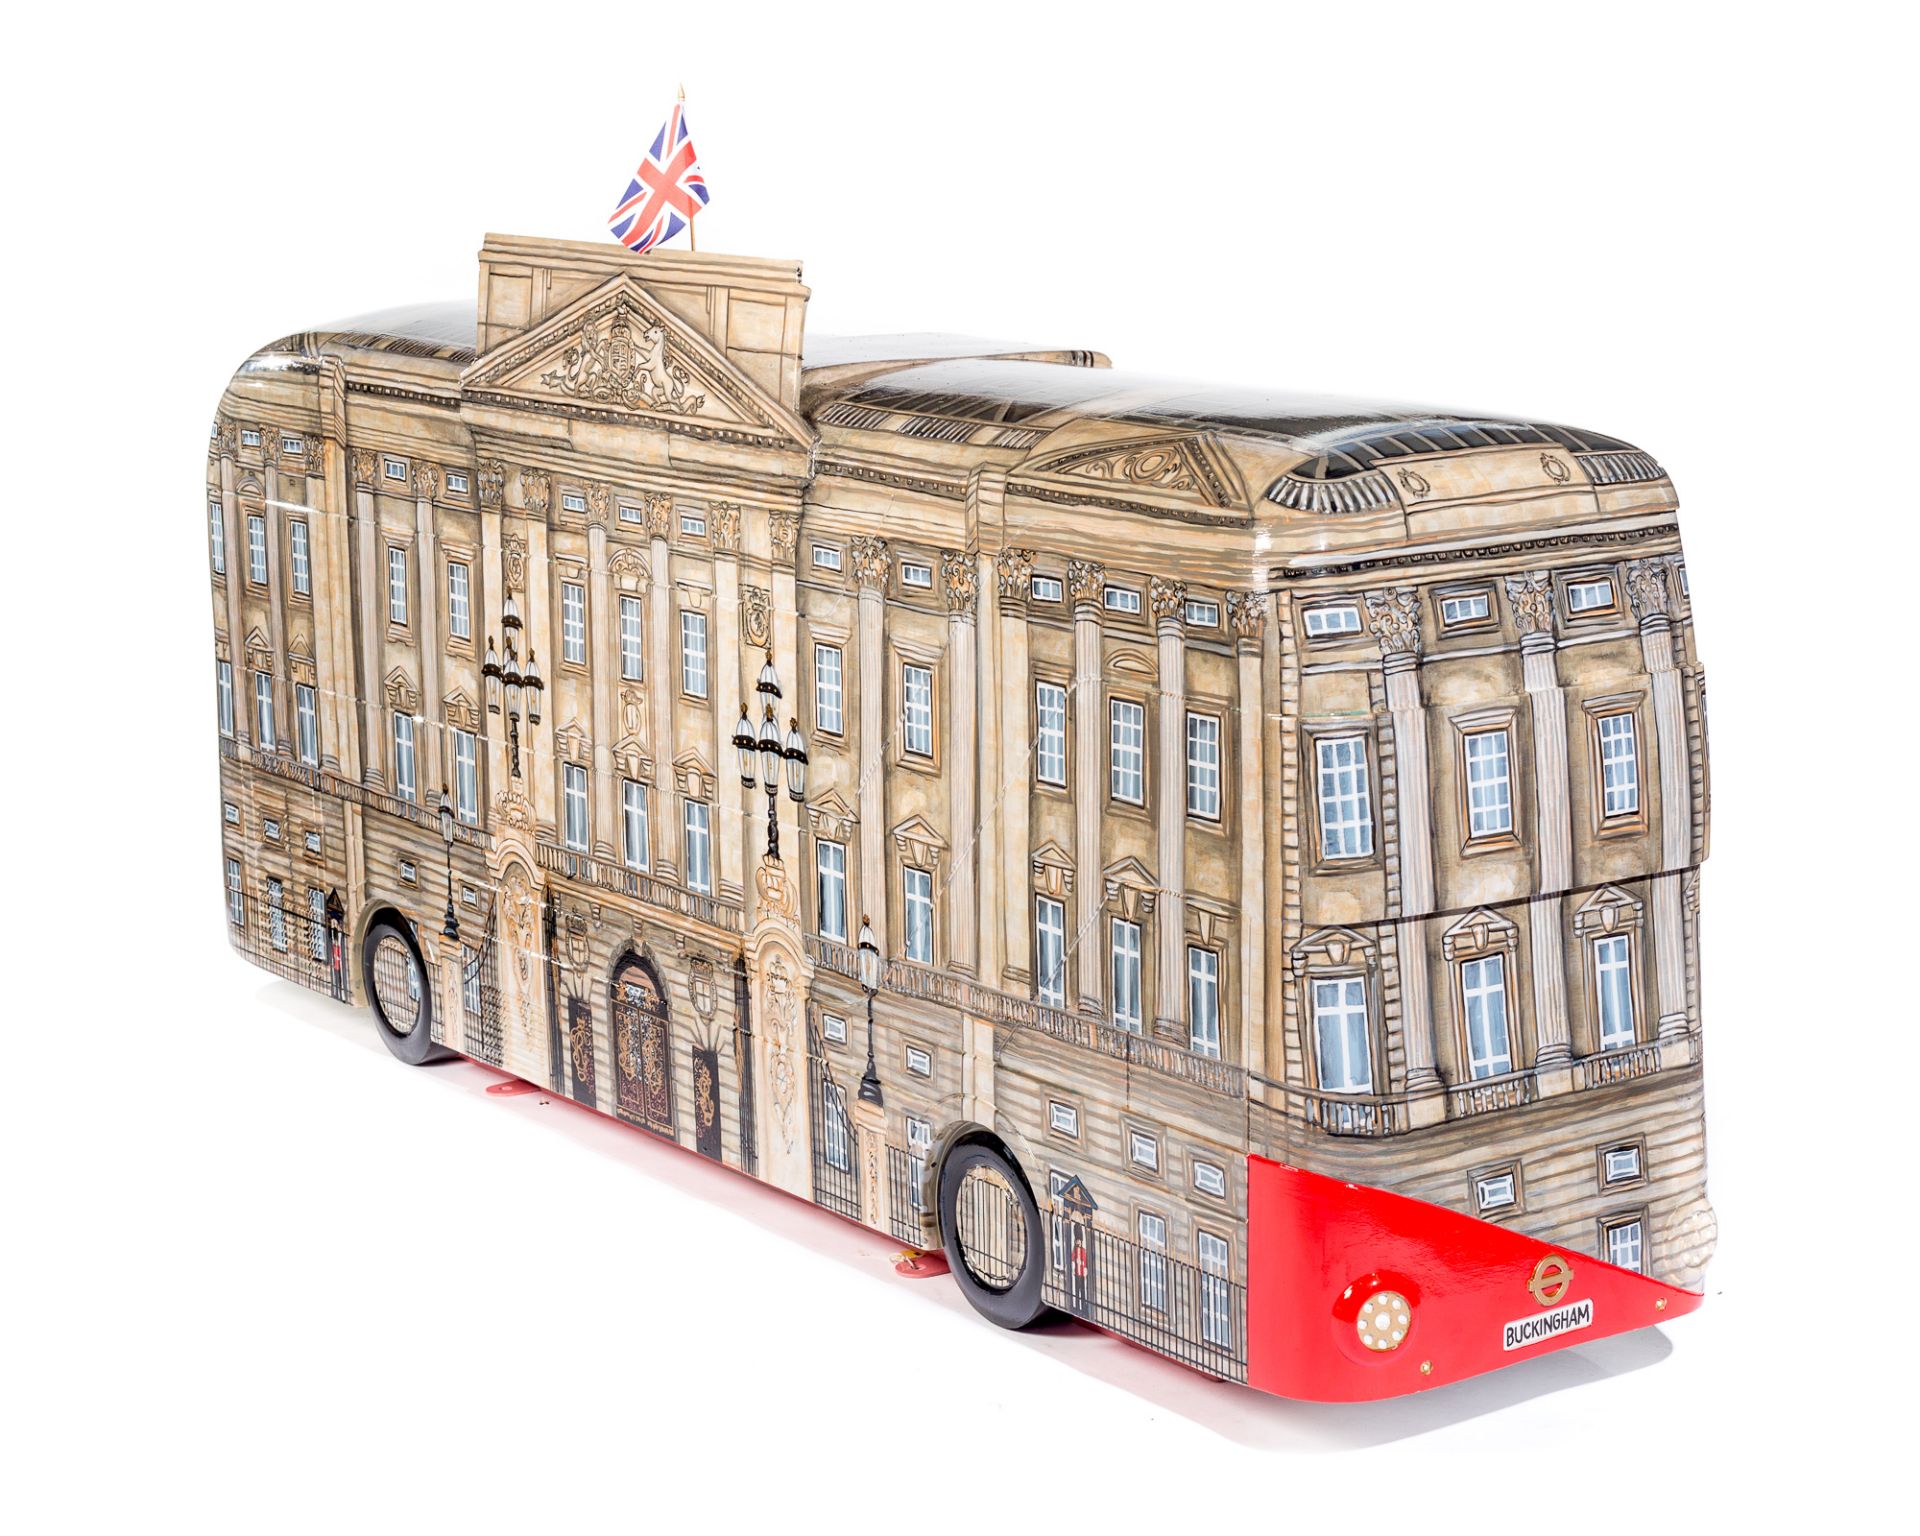 Artist: Mandii Pope  Design: Buckingham Palace Bus    About the artist   Inspired by iconic London